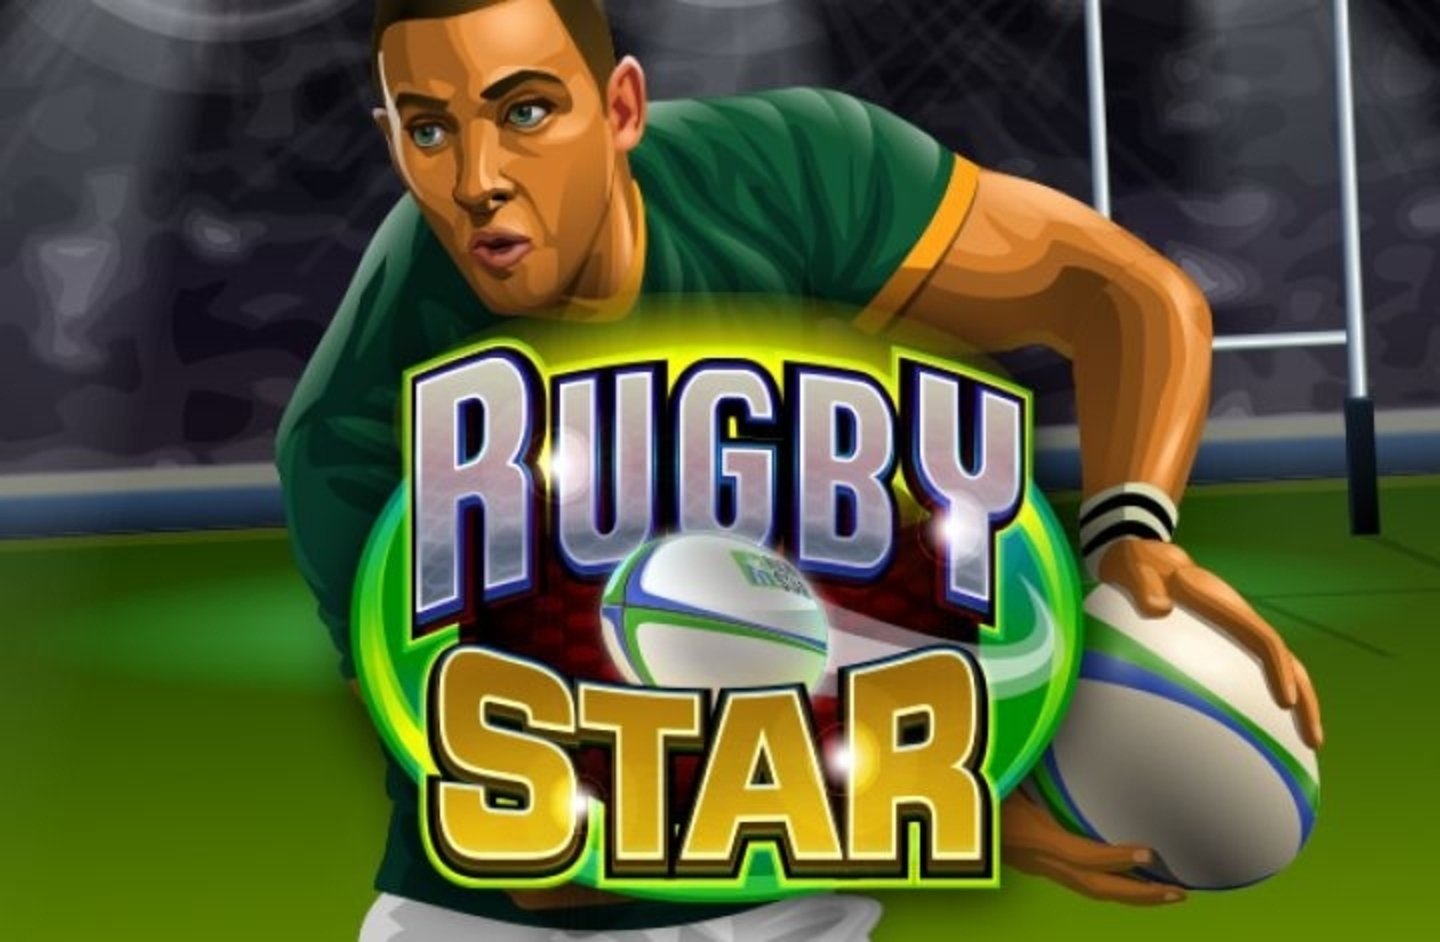 Rugby Star demo